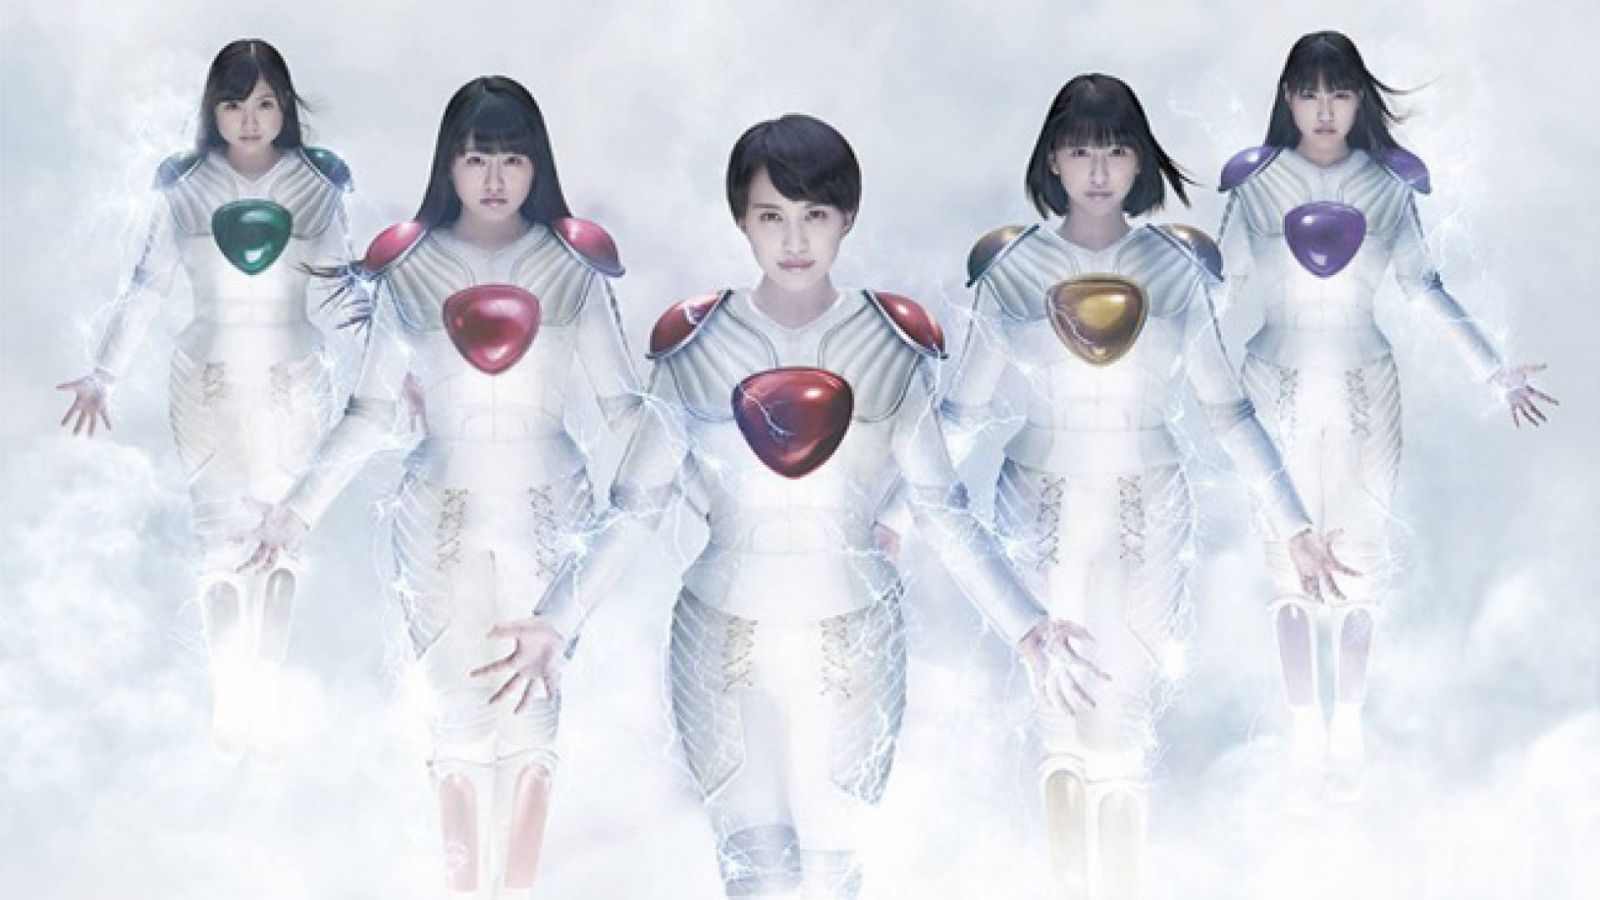 Momoiro Clover Z - Pledge of Z © STARDUST PROMOTION INC, All rights reserved.